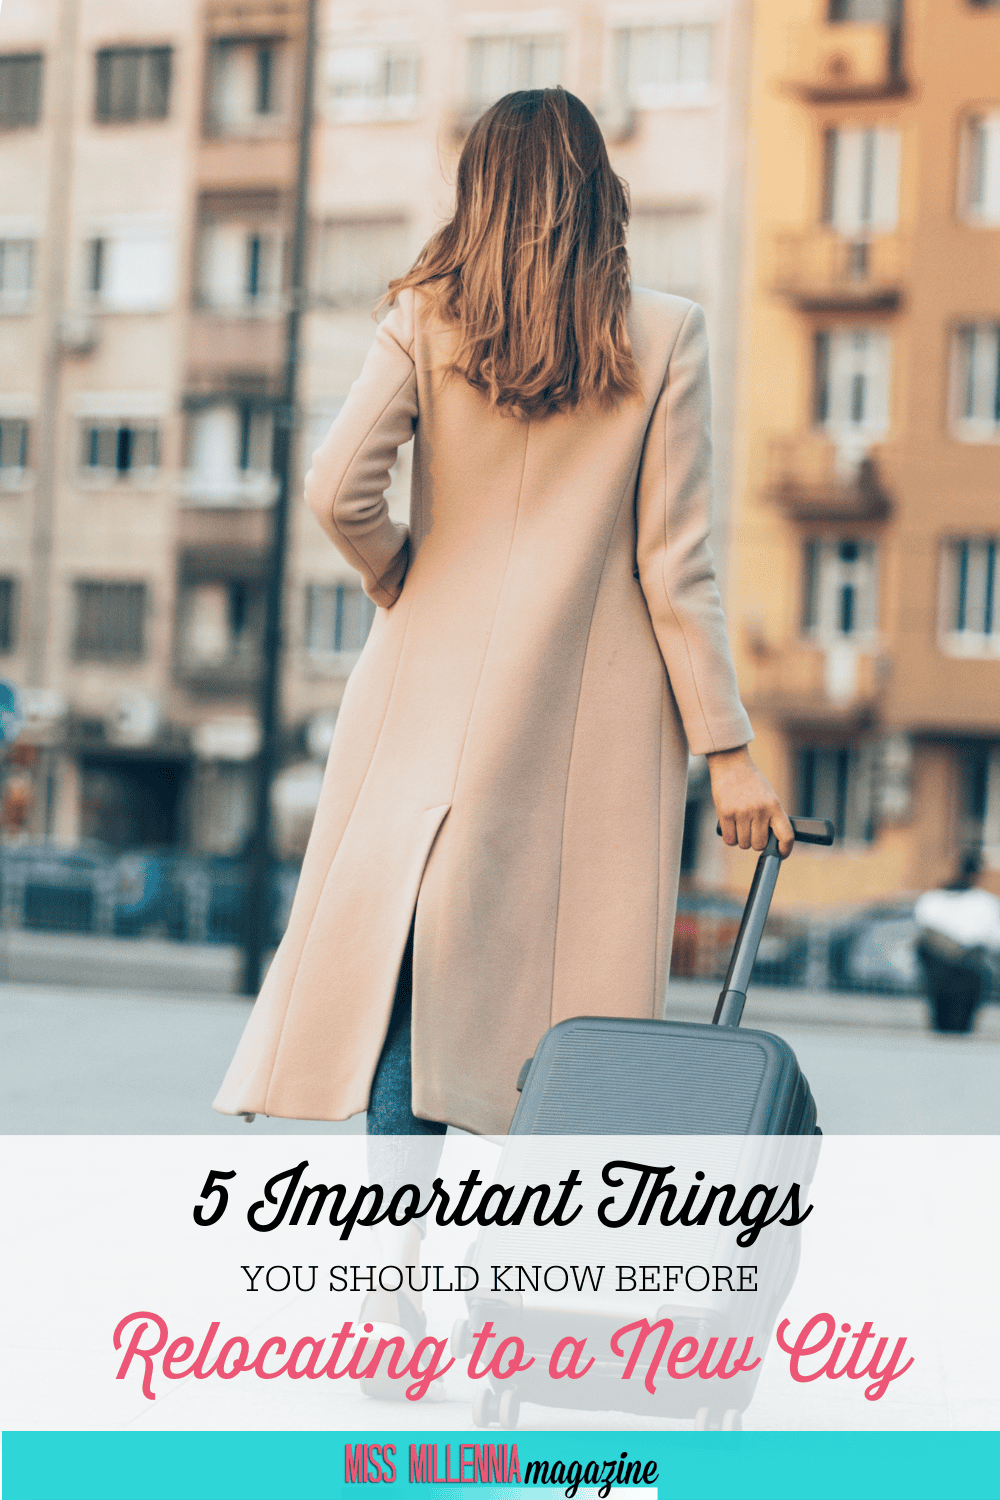 5 Important Things You Should Know Before Relocating to a New City